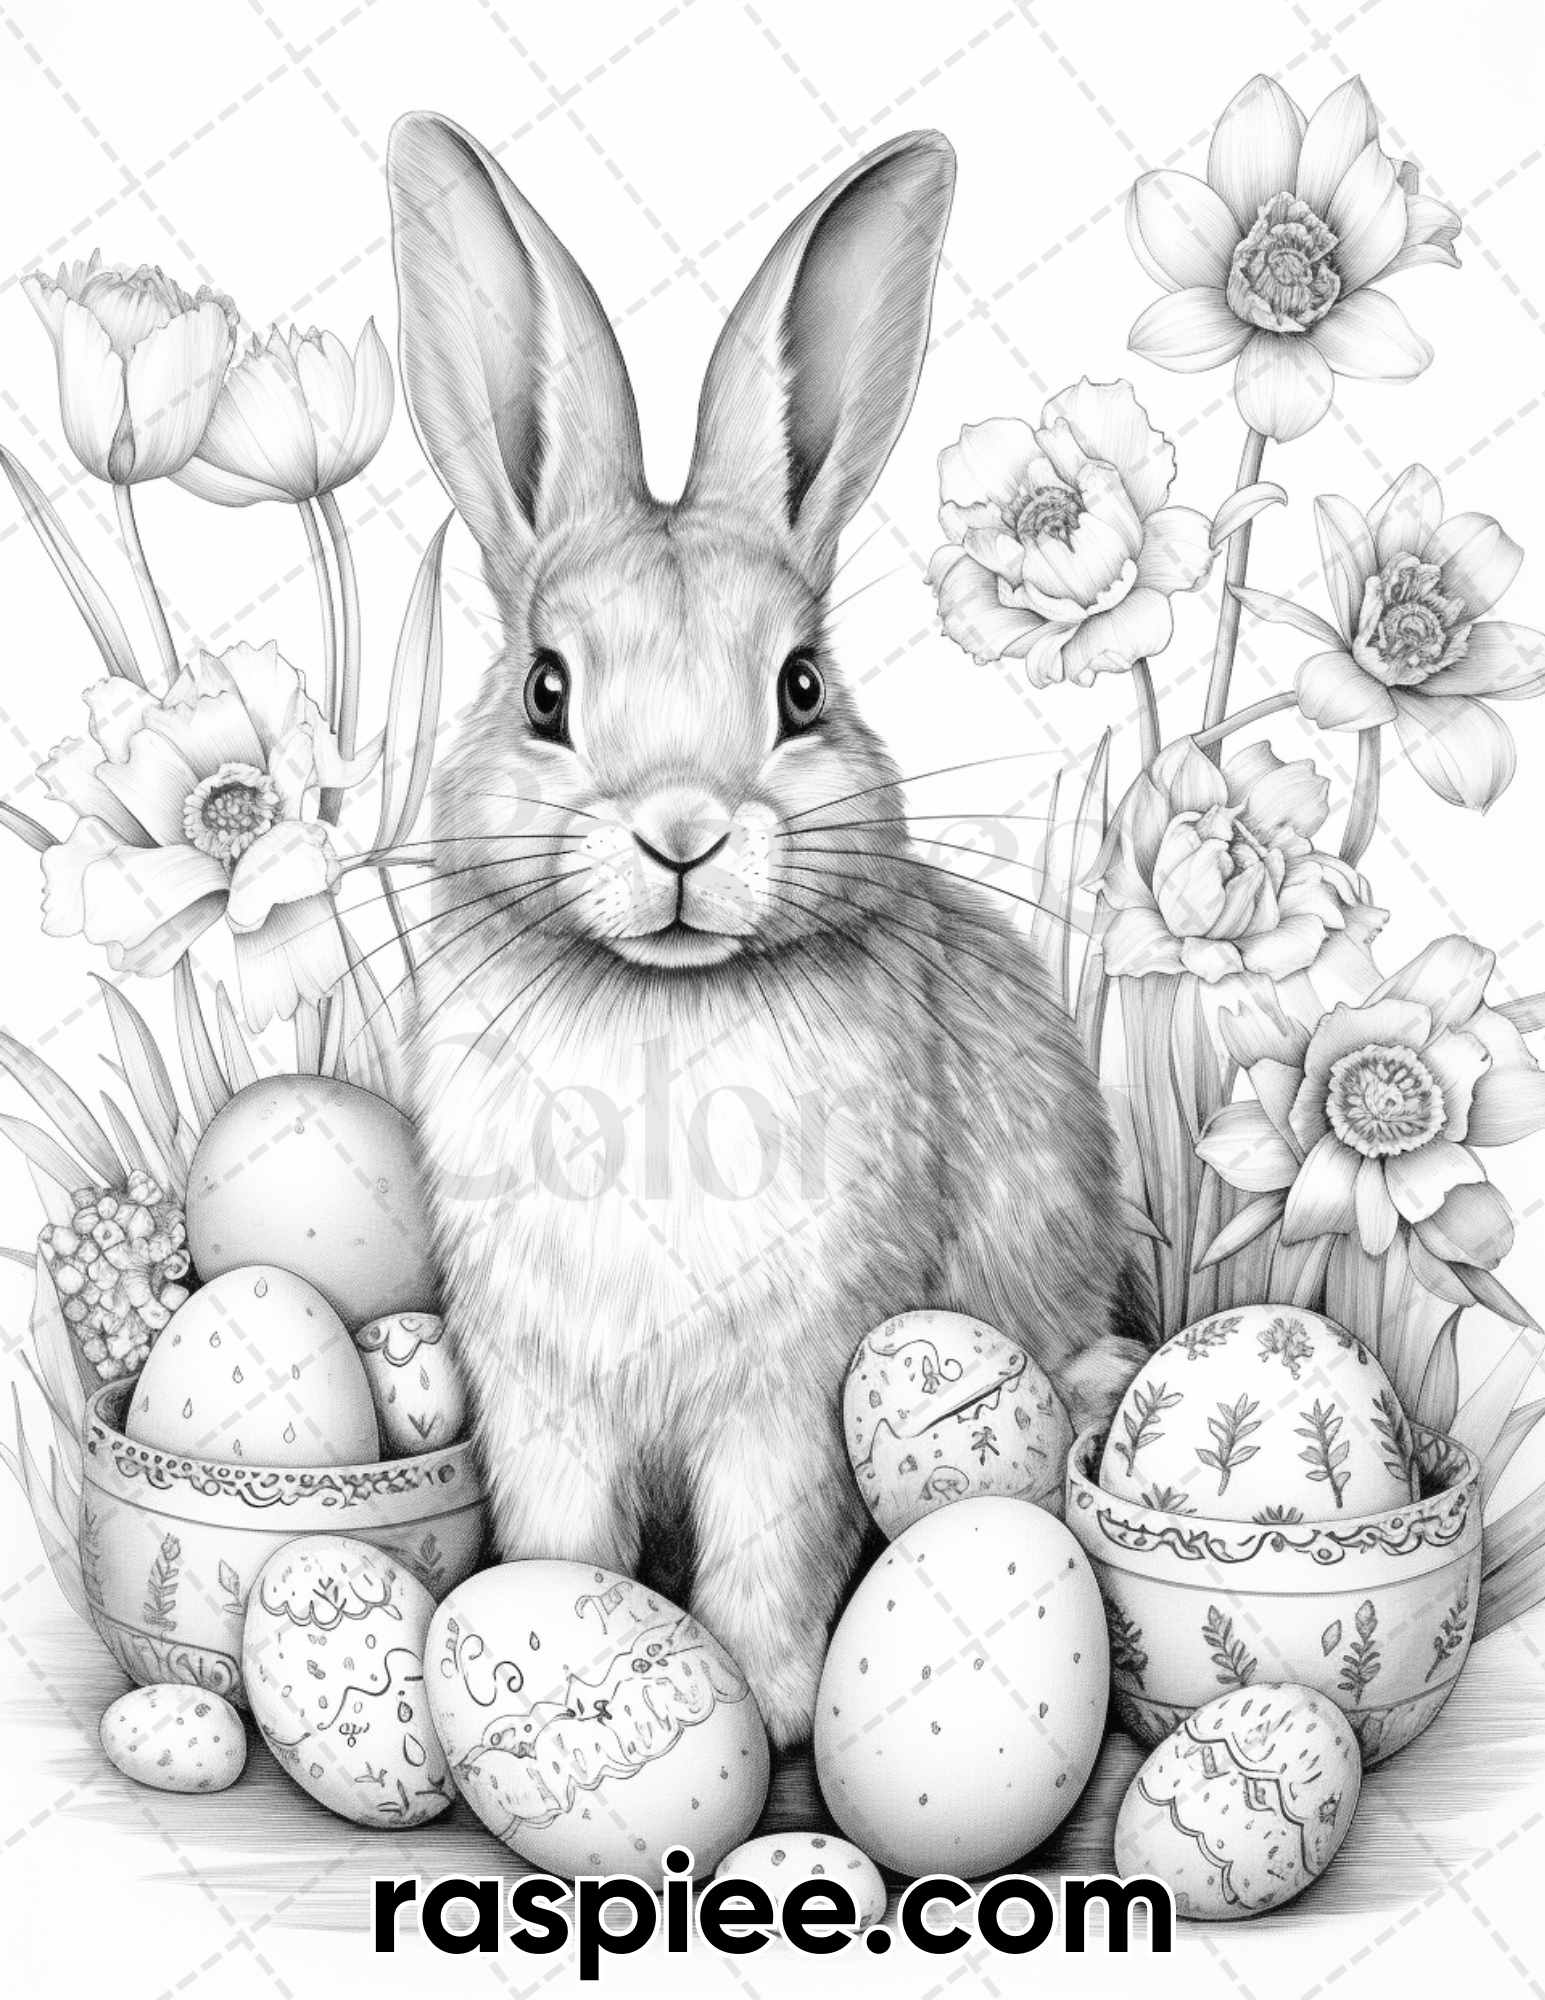 adult coloring pages, adult coloring sheets, adult coloring book pdf, adult coloring book printable, grayscale coloring pages, grayscale coloring books, spring coloring pages for adults, spring coloring book, holiday coloring pages for adults, easter coloring pages for adults, easter coloring book, easter bunny coloring pages